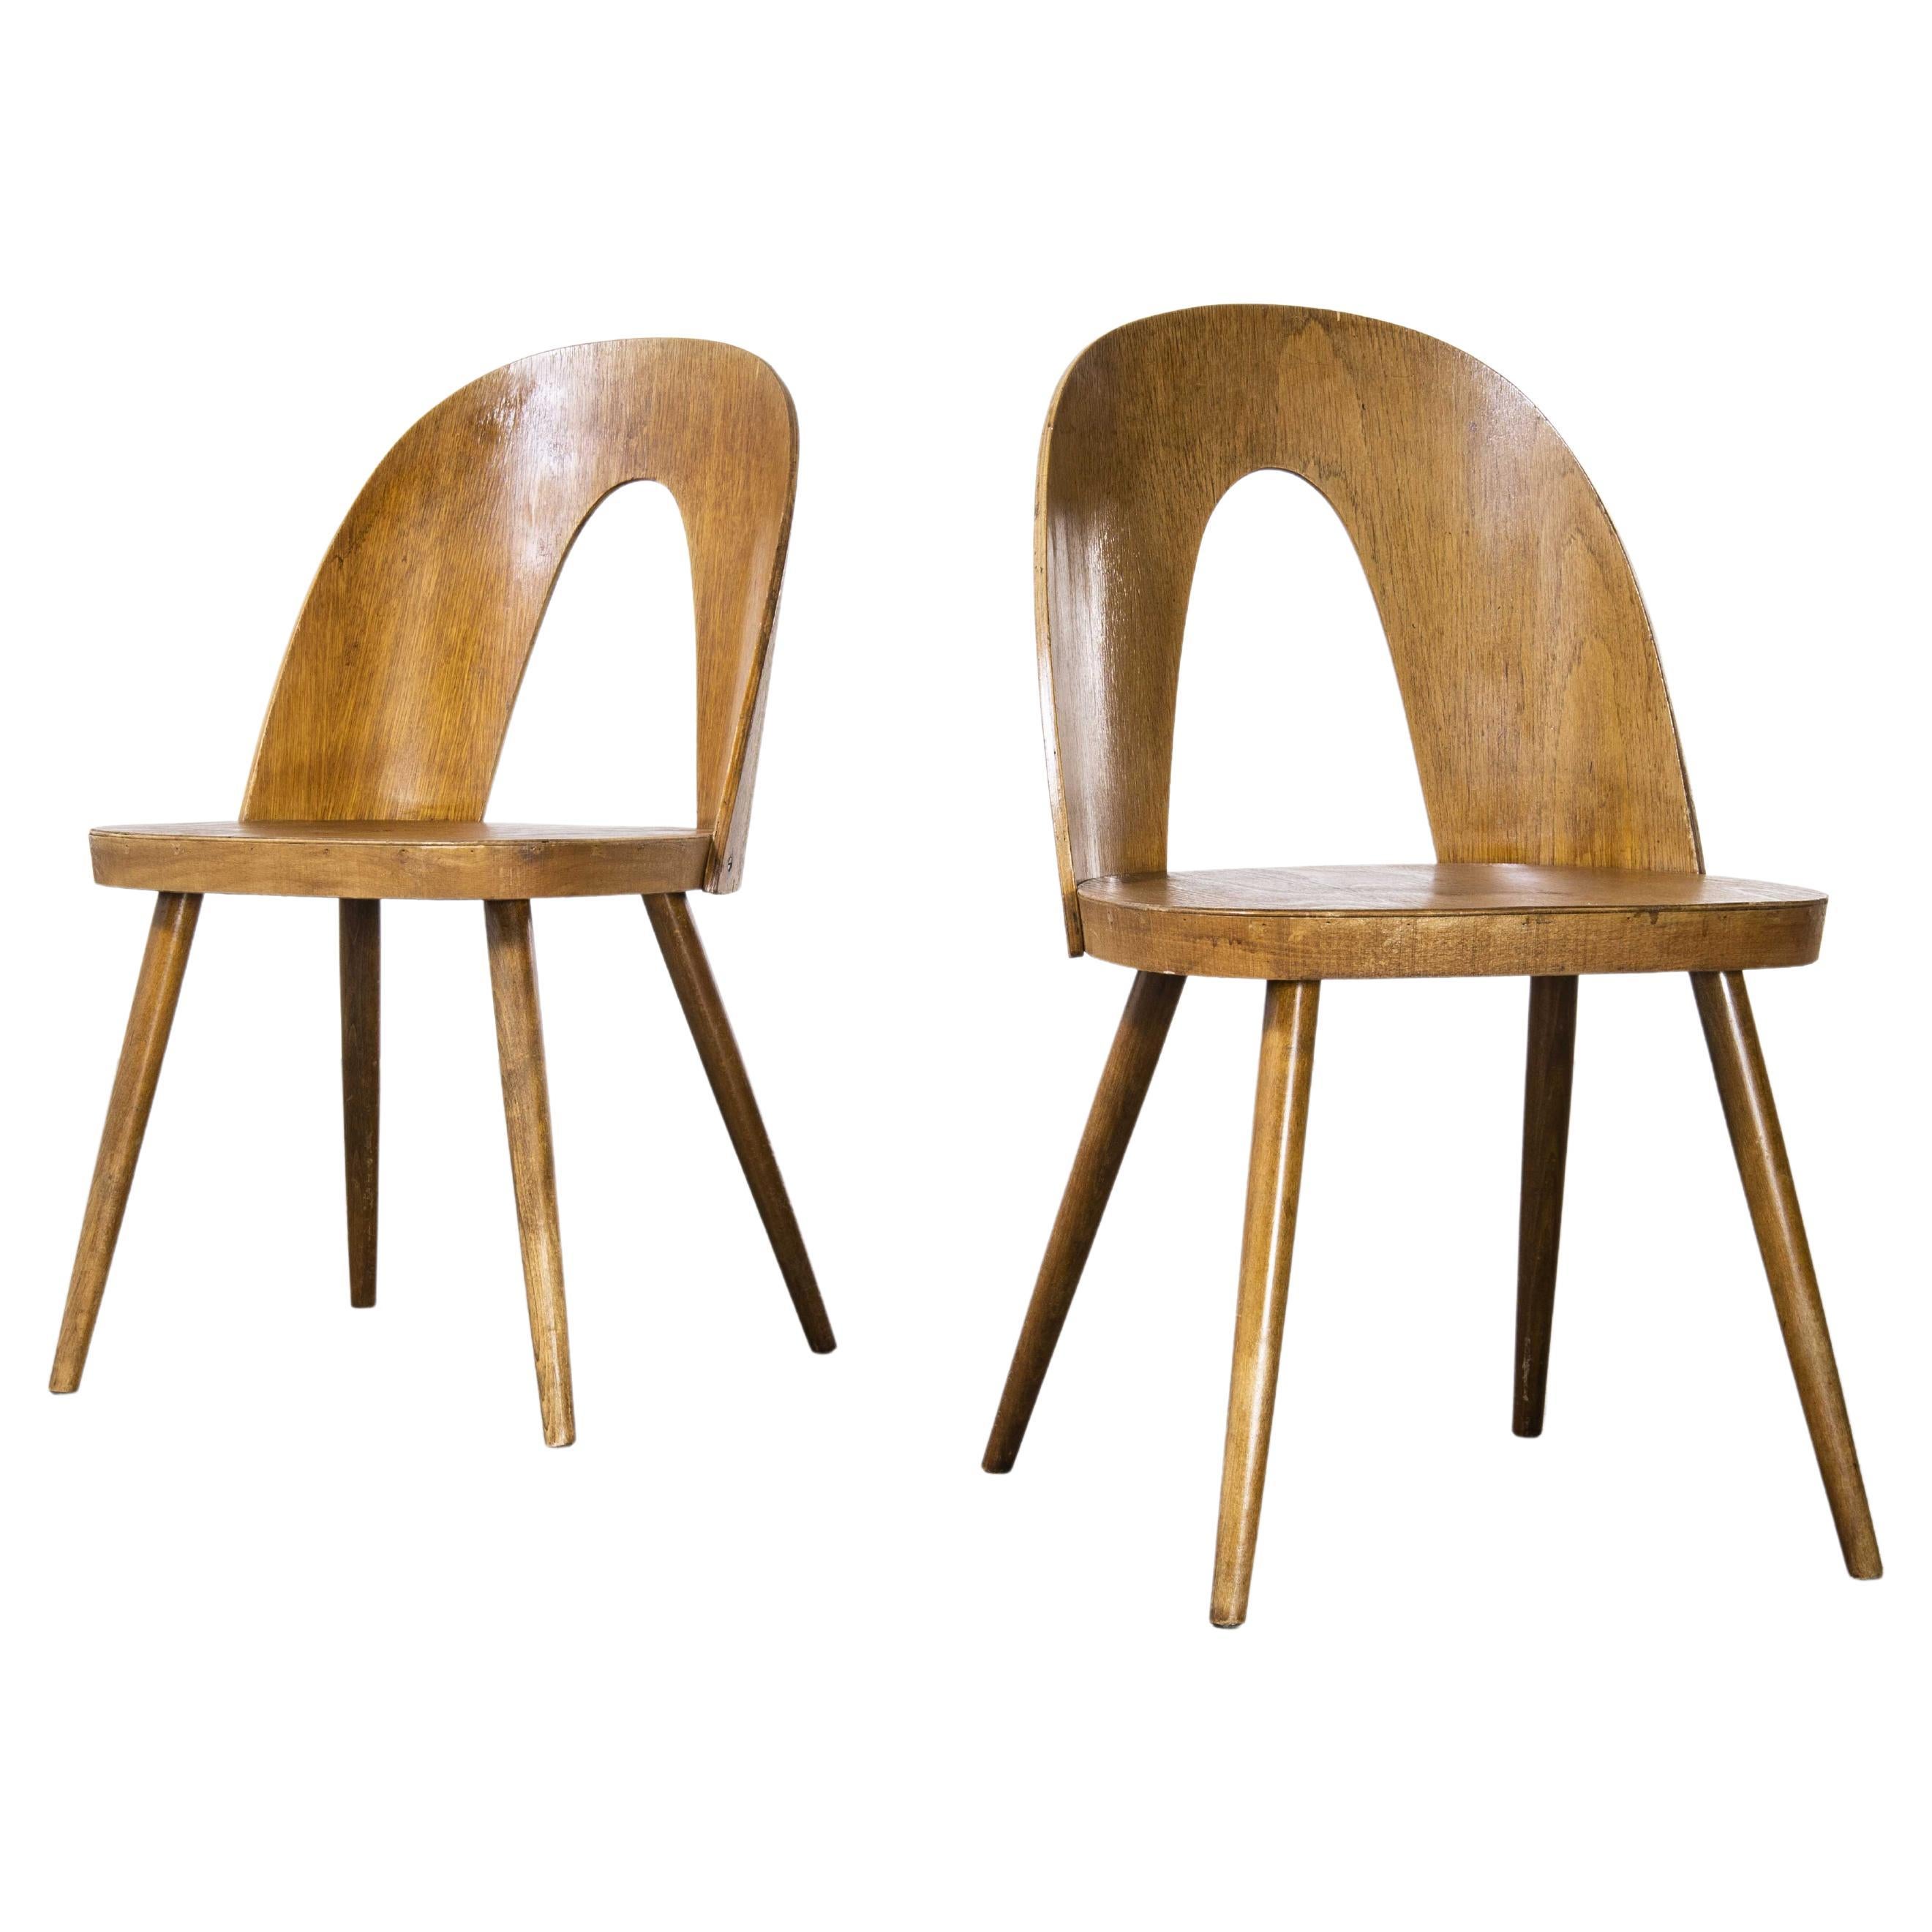 1960s Side, Dining Chairs by Antonin Suman for Ton, Pair For Sale